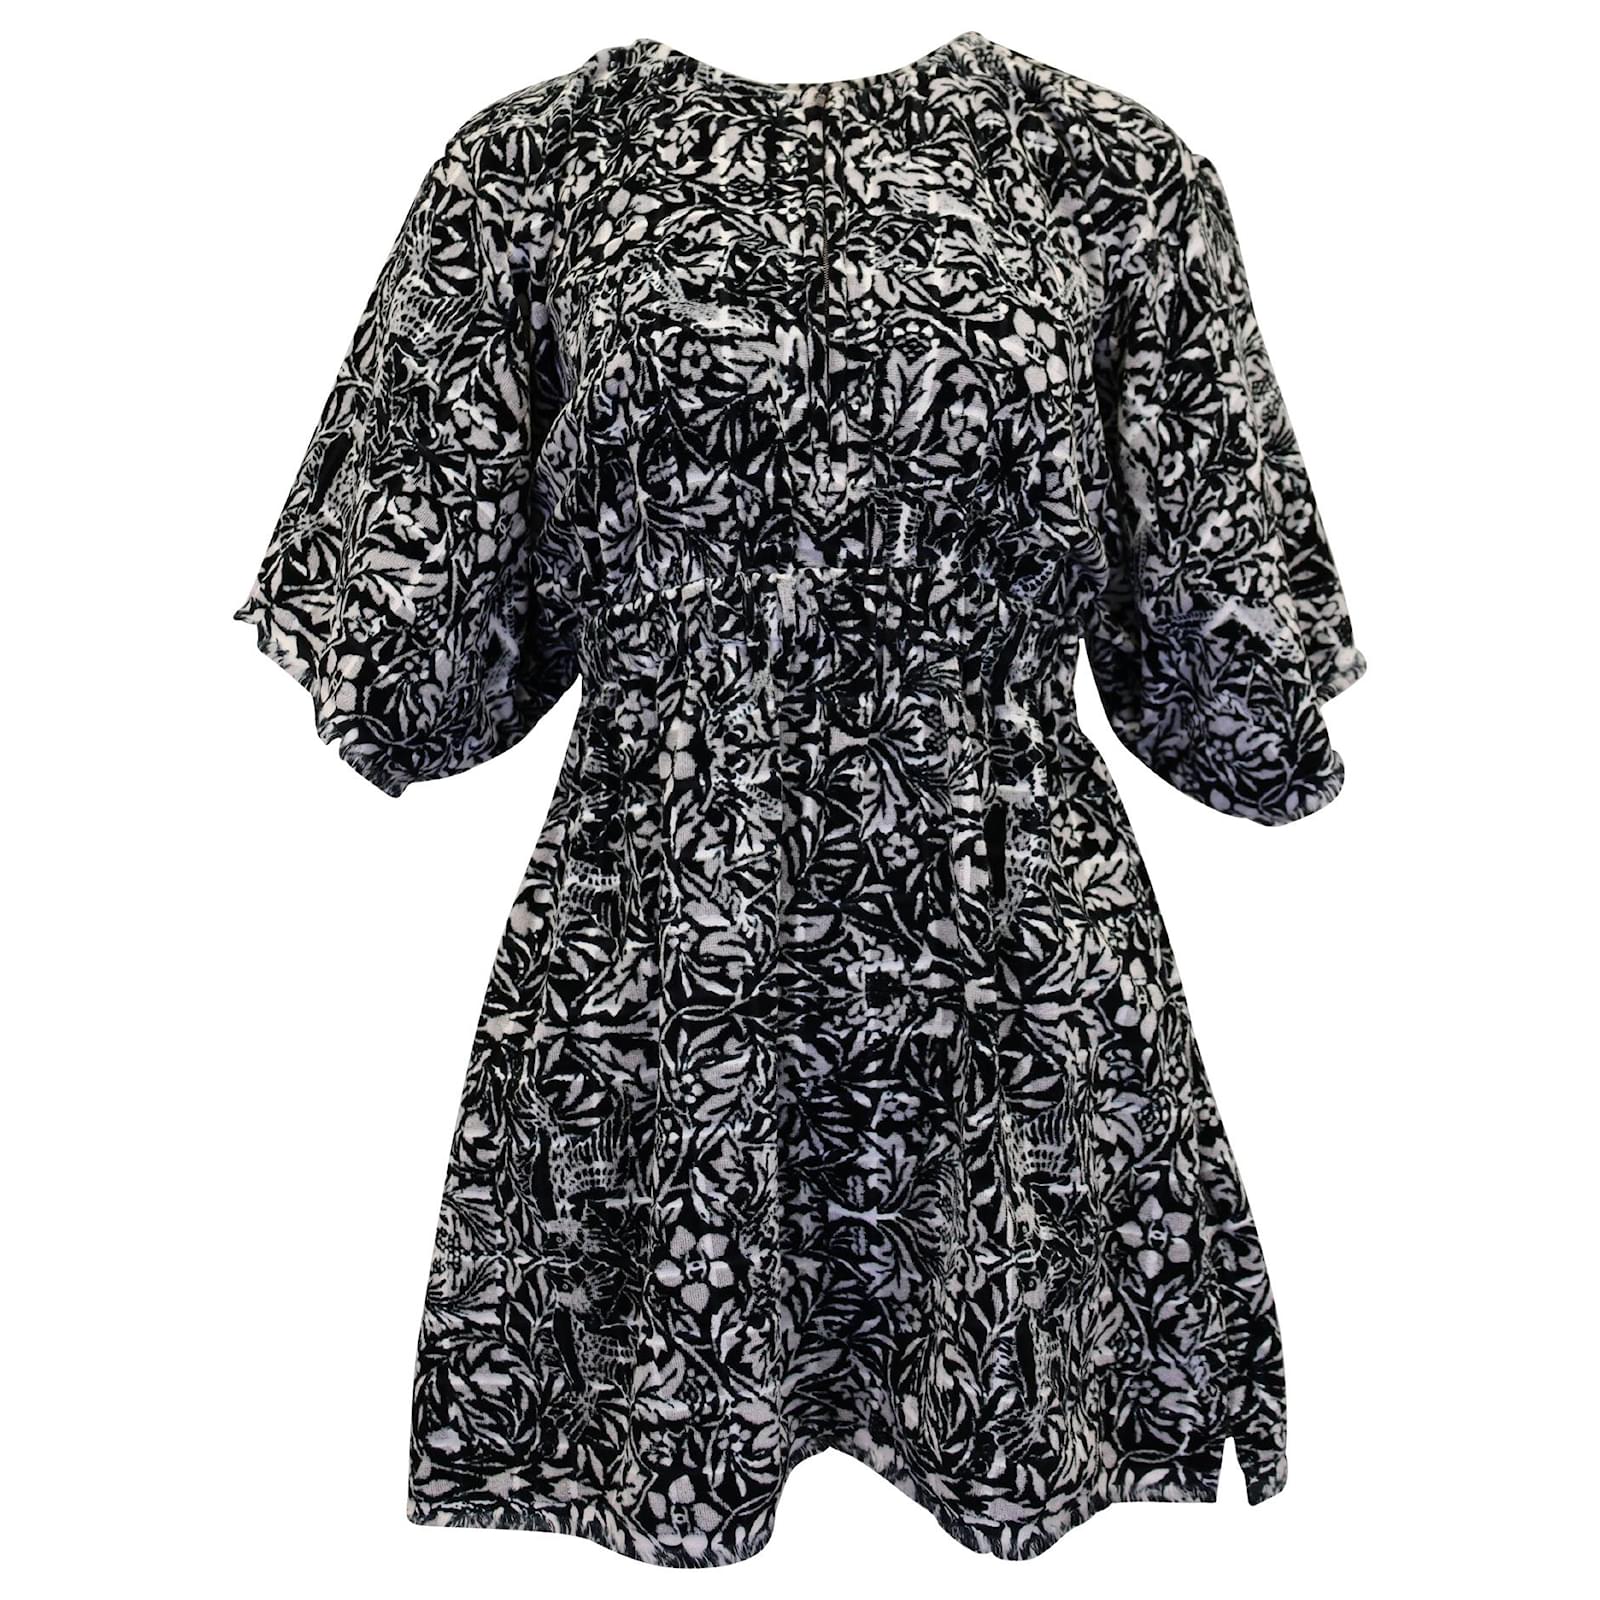 Dresses Chanel Chanel Printed Mini Dress in Black Cotton Size 42 FR